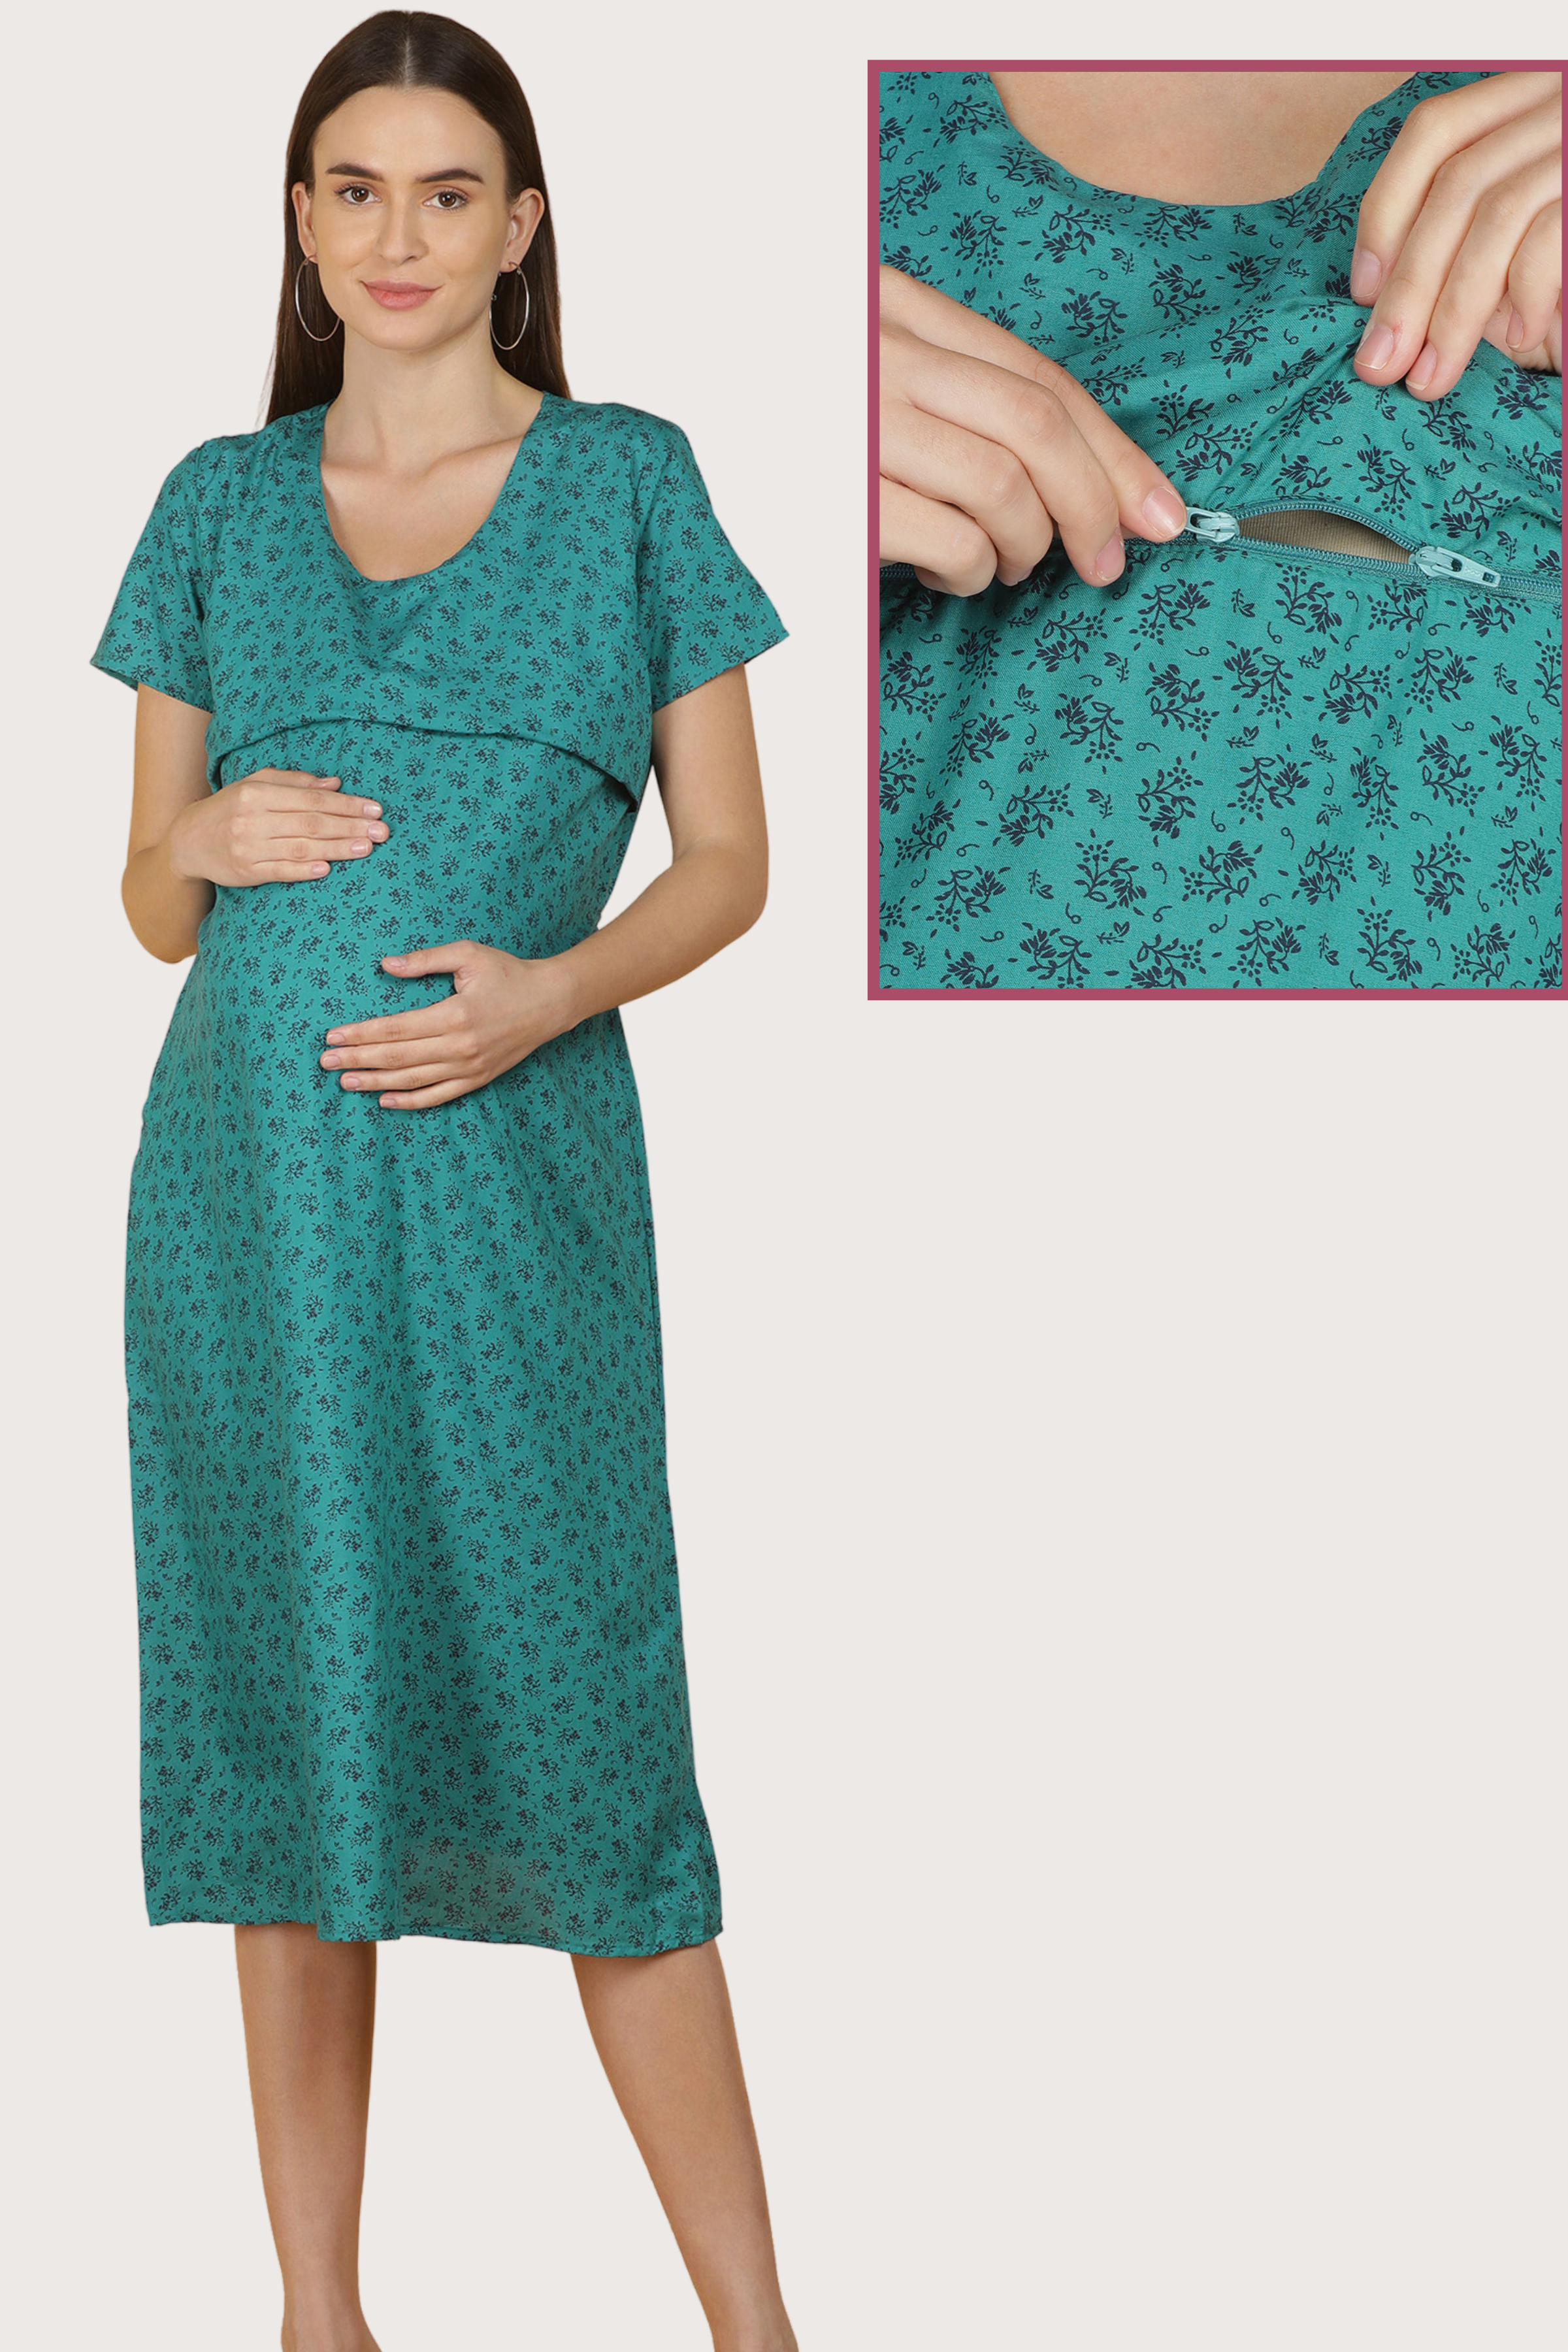 Women's Maternity Gown /Maternity wear/ Feeding Gown Midi Length Cotton -  Titapu Baby Kids Store